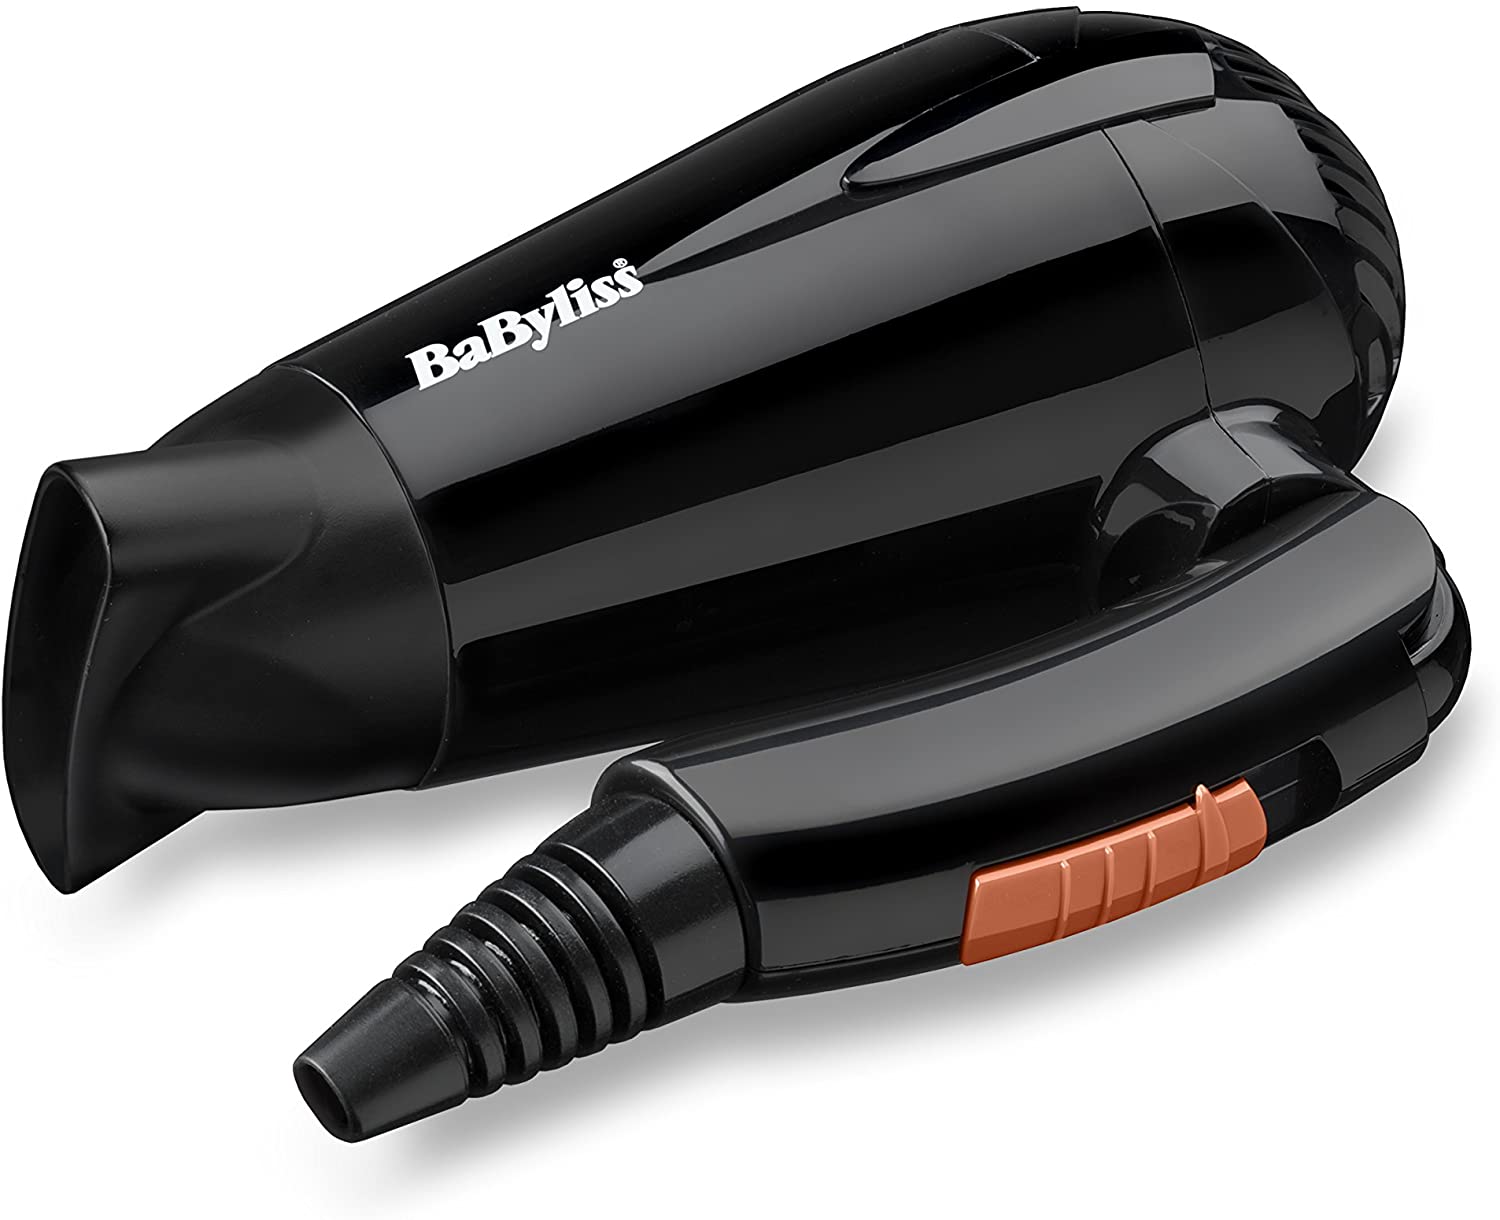 Image of the black Babyliss 2000w travel hair dryer folded to show its compact size